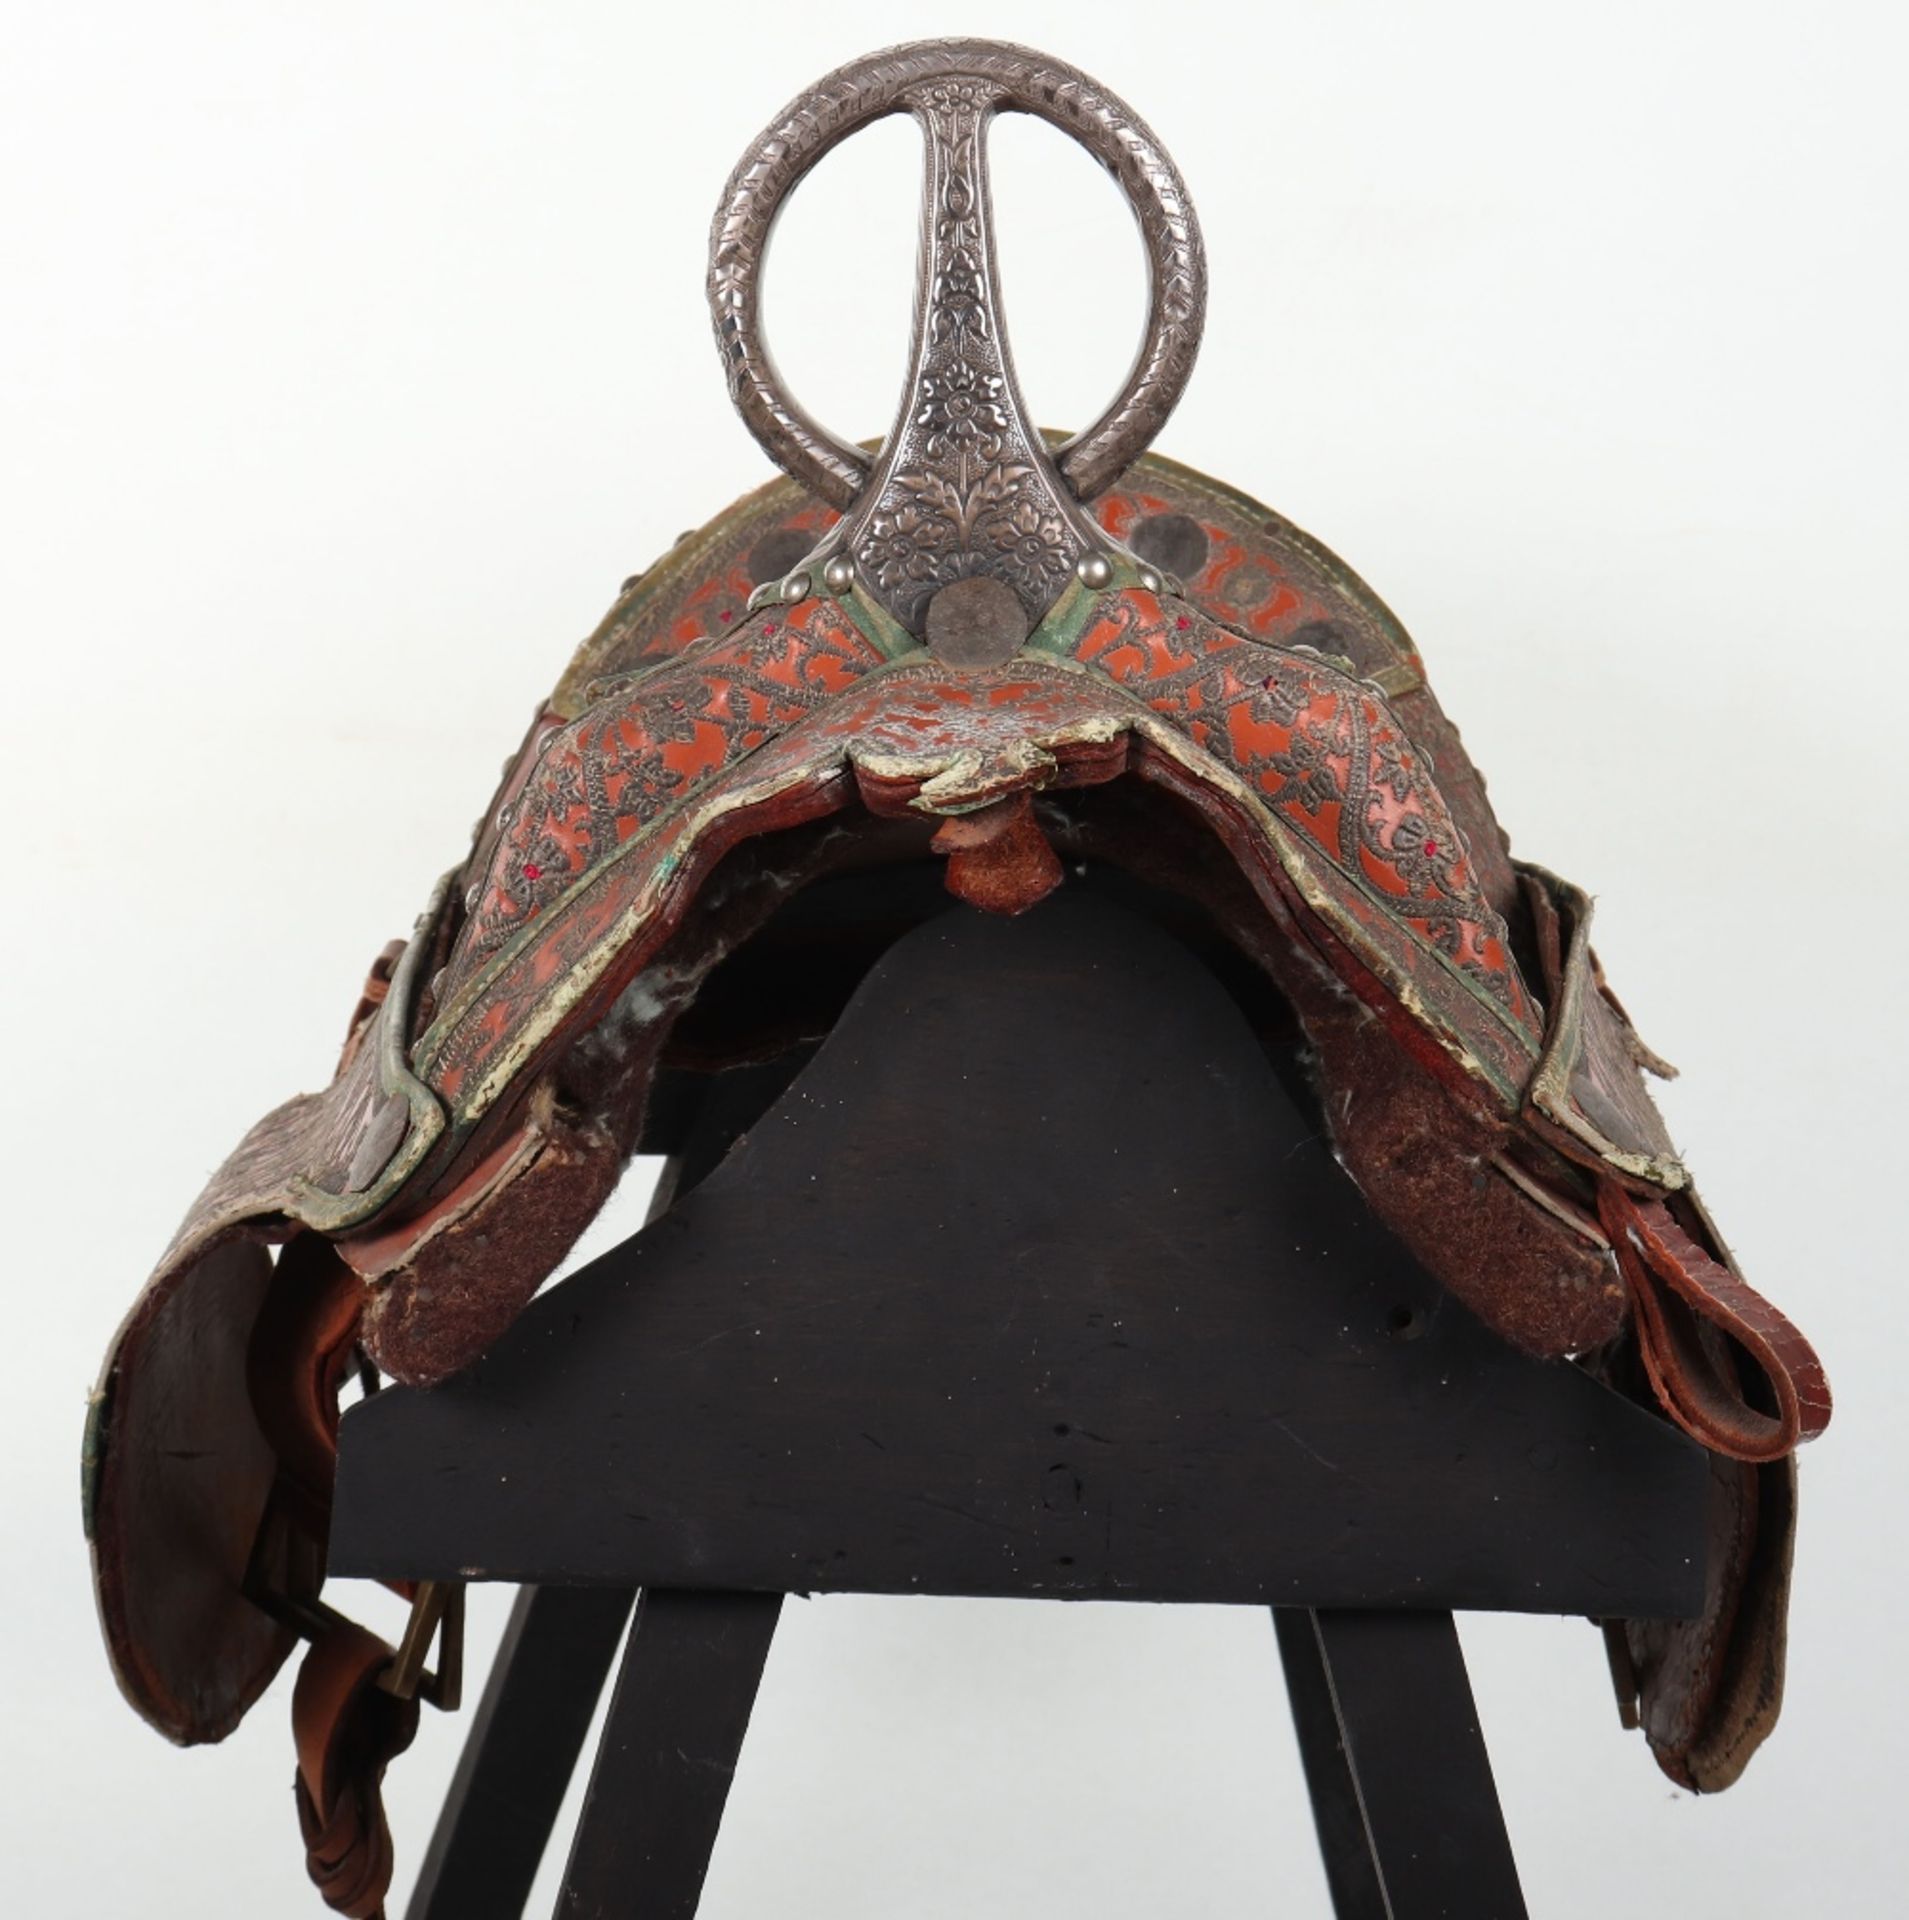 Fine and Scarce North Indian Saddle, Probably Late 19th or Early 20th Century - Image 11 of 12